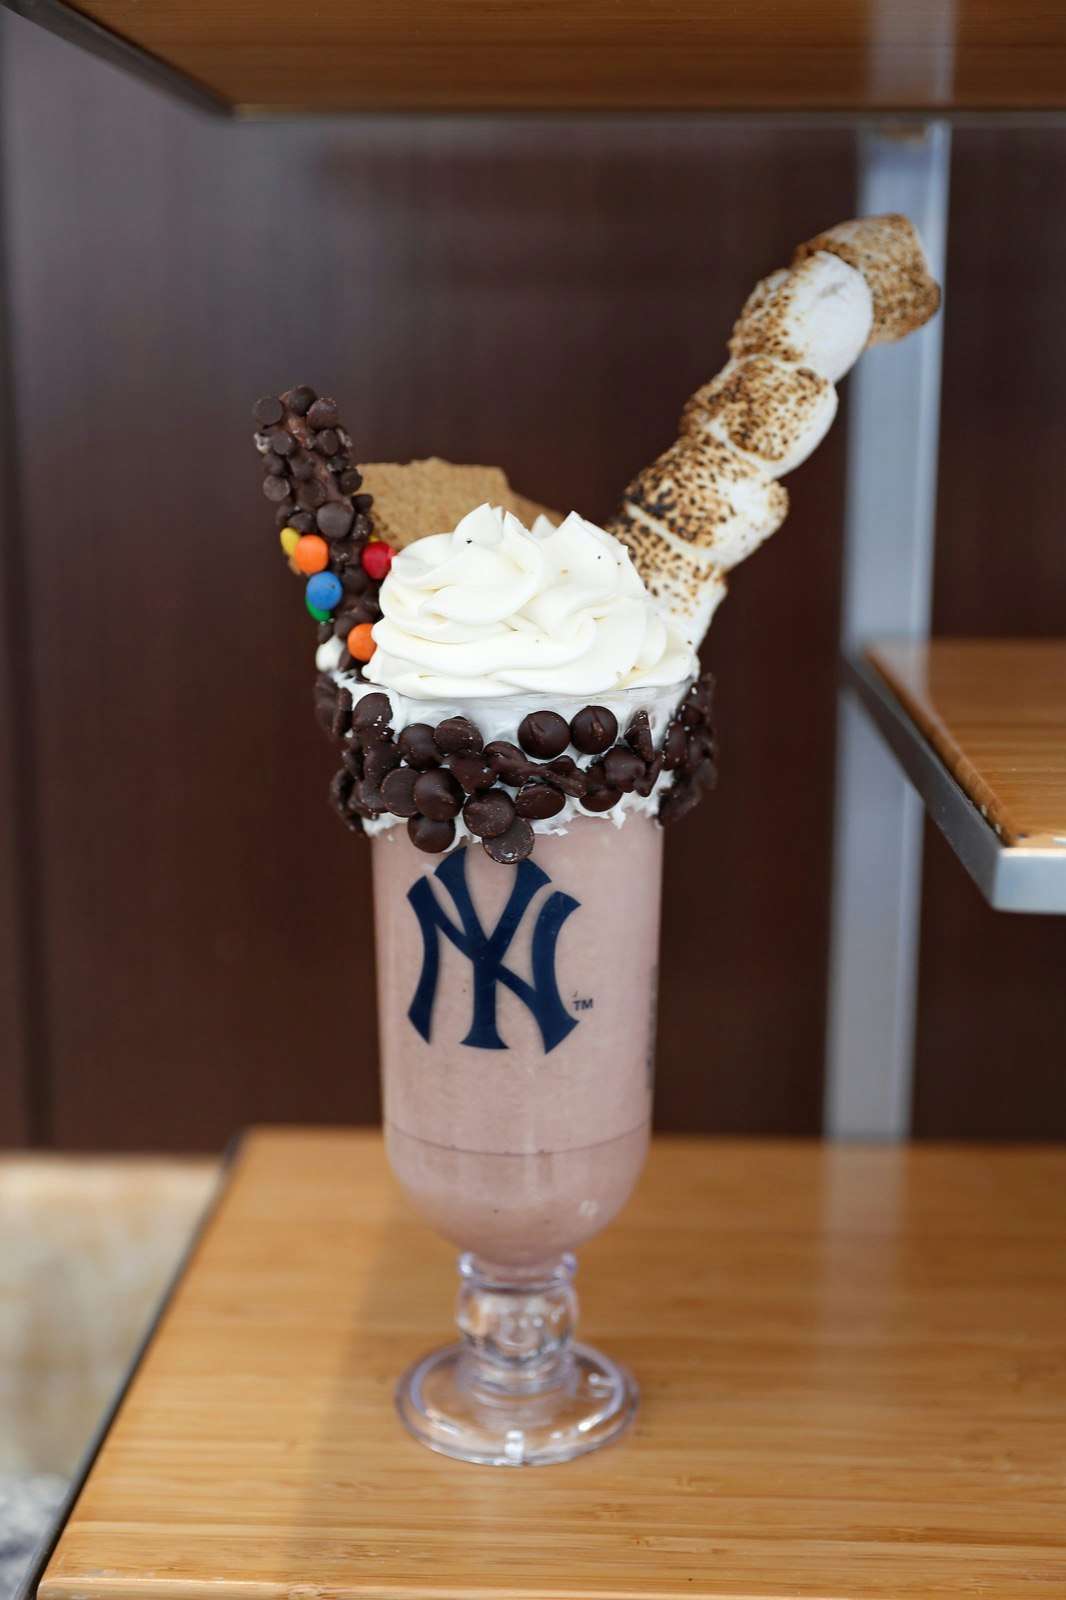 A chocolate shake rimmed with chocolate chips, topped with whipped cream and toasted marshmallows; ballpark food